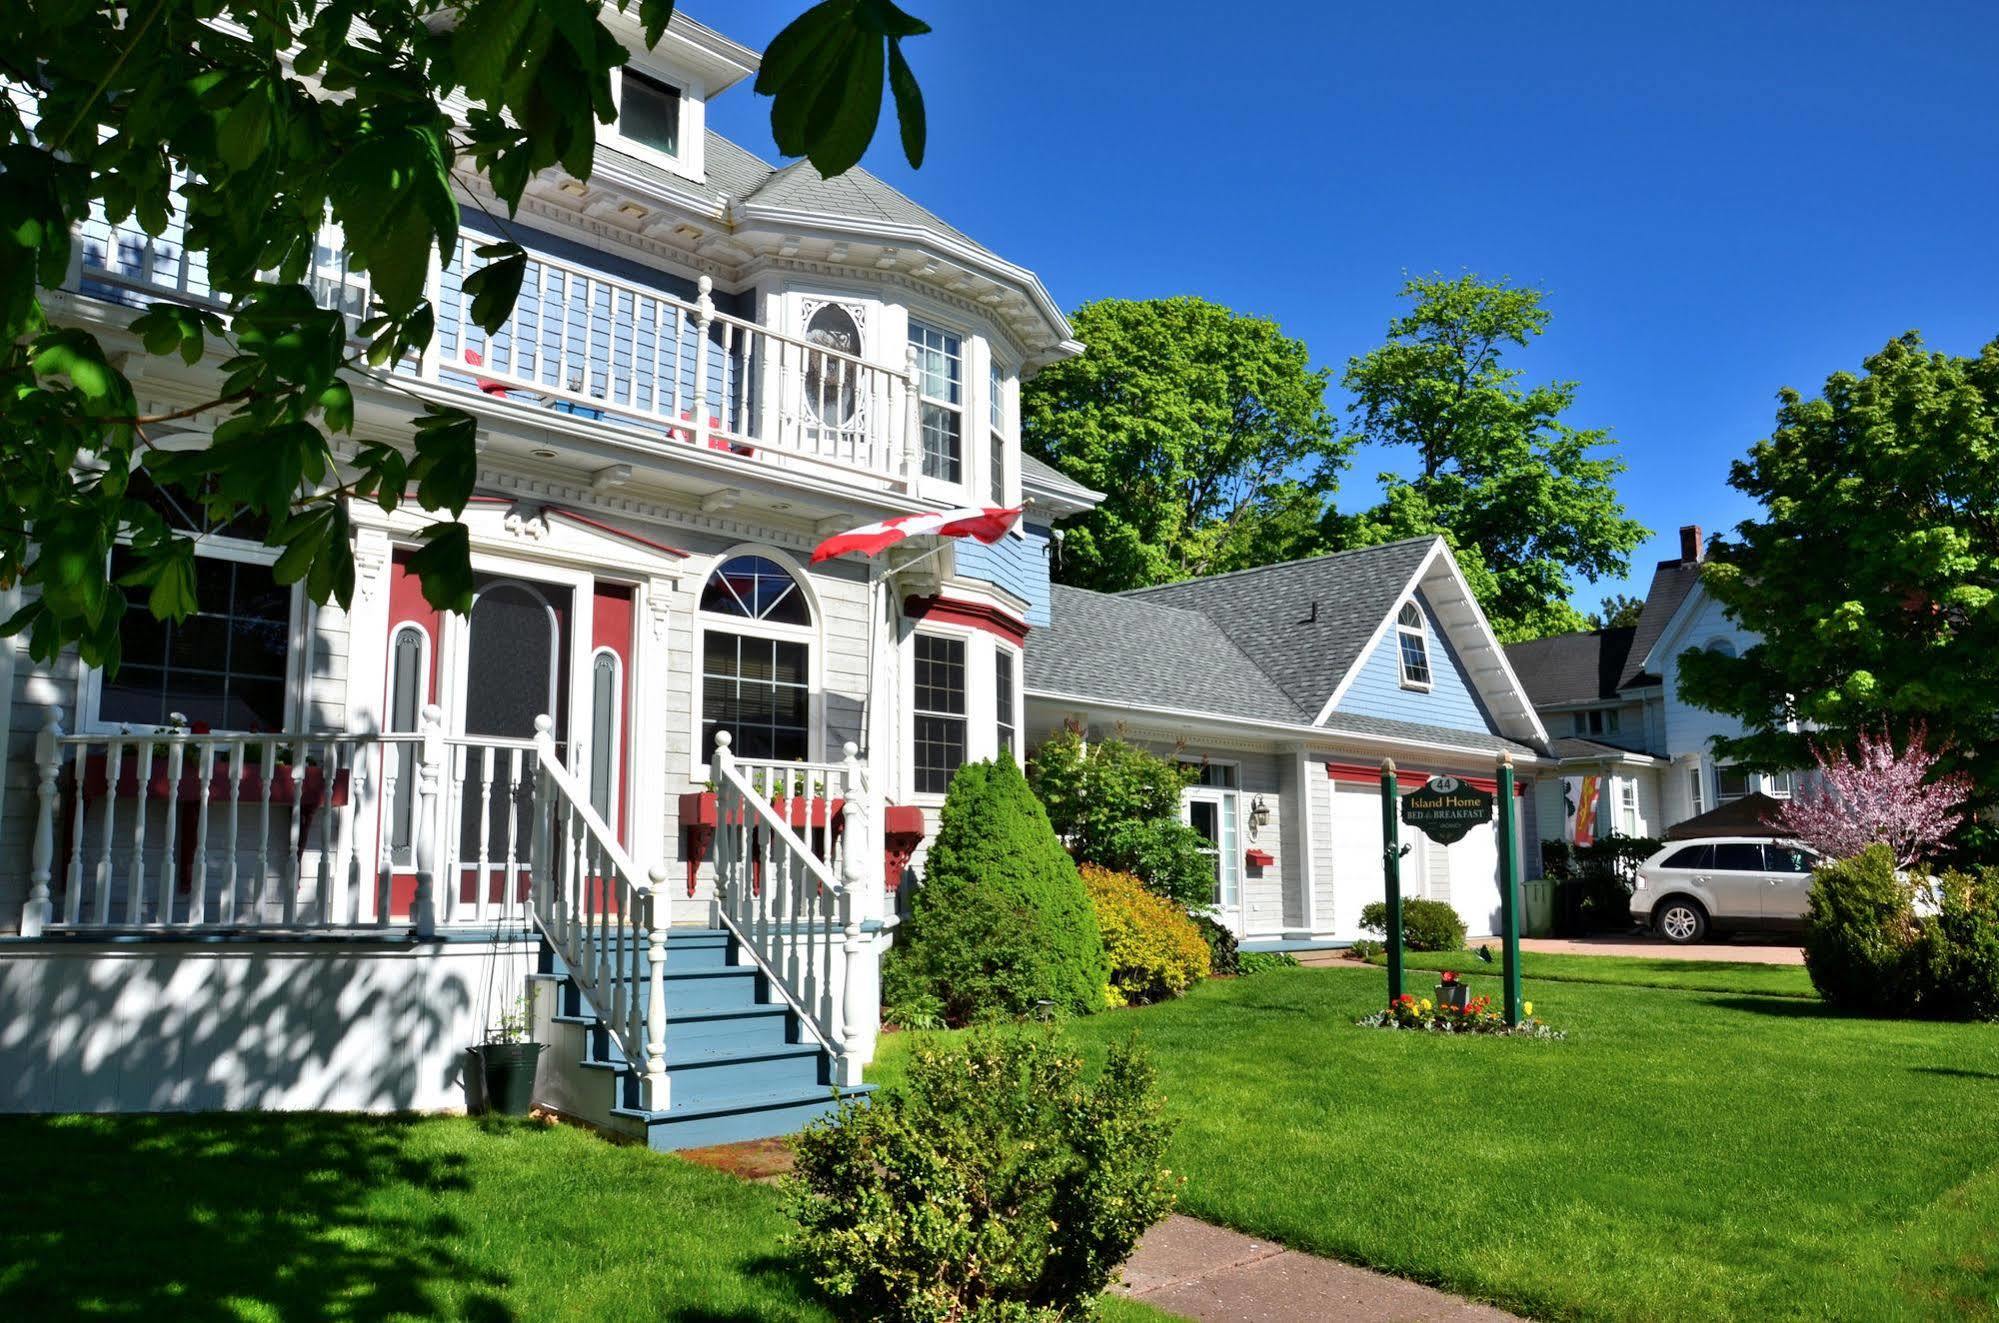 Island Home Bed And Breakfast Summerside Esterno foto